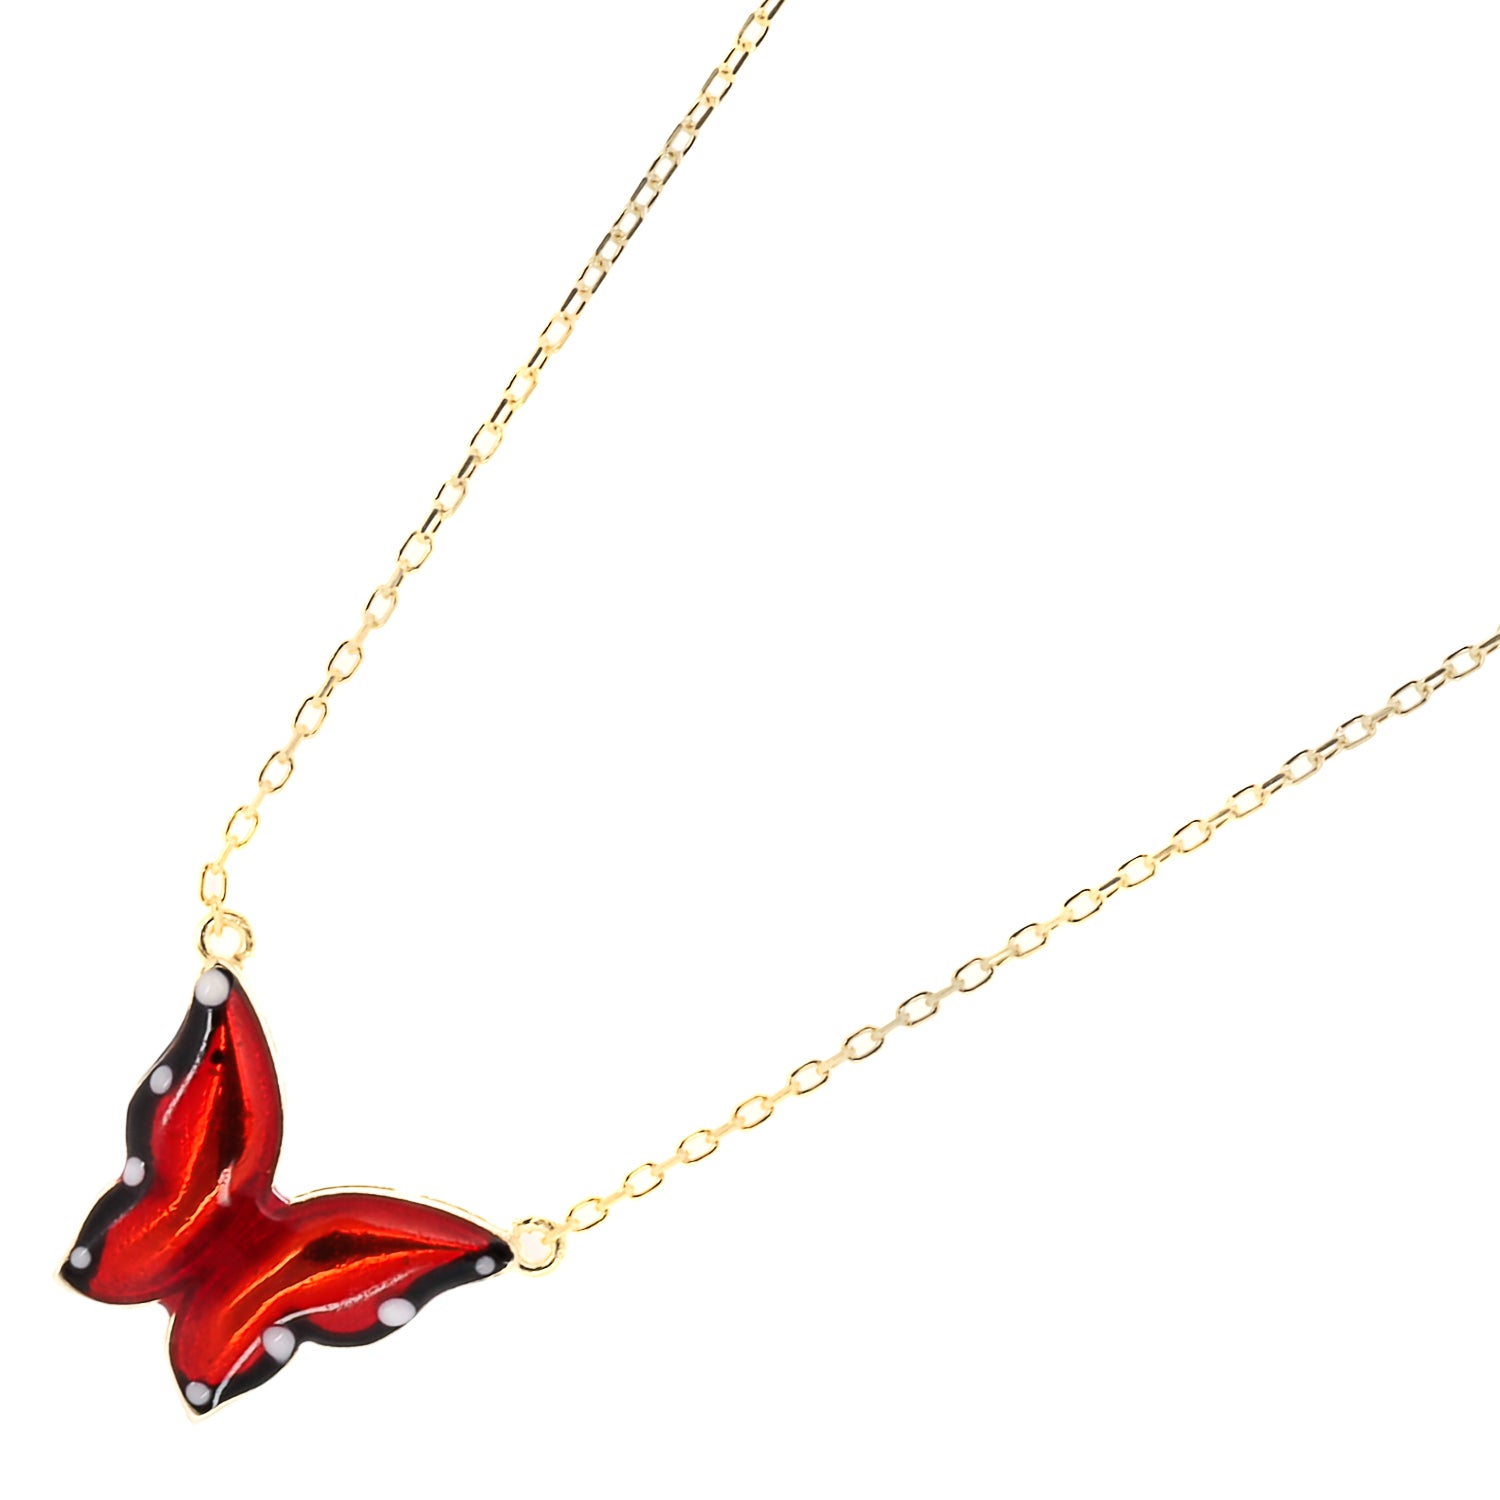 The elegant Gold Joy Red Enamel Butterfly Necklace, a beautiful accessory that brings joy and spirituality.